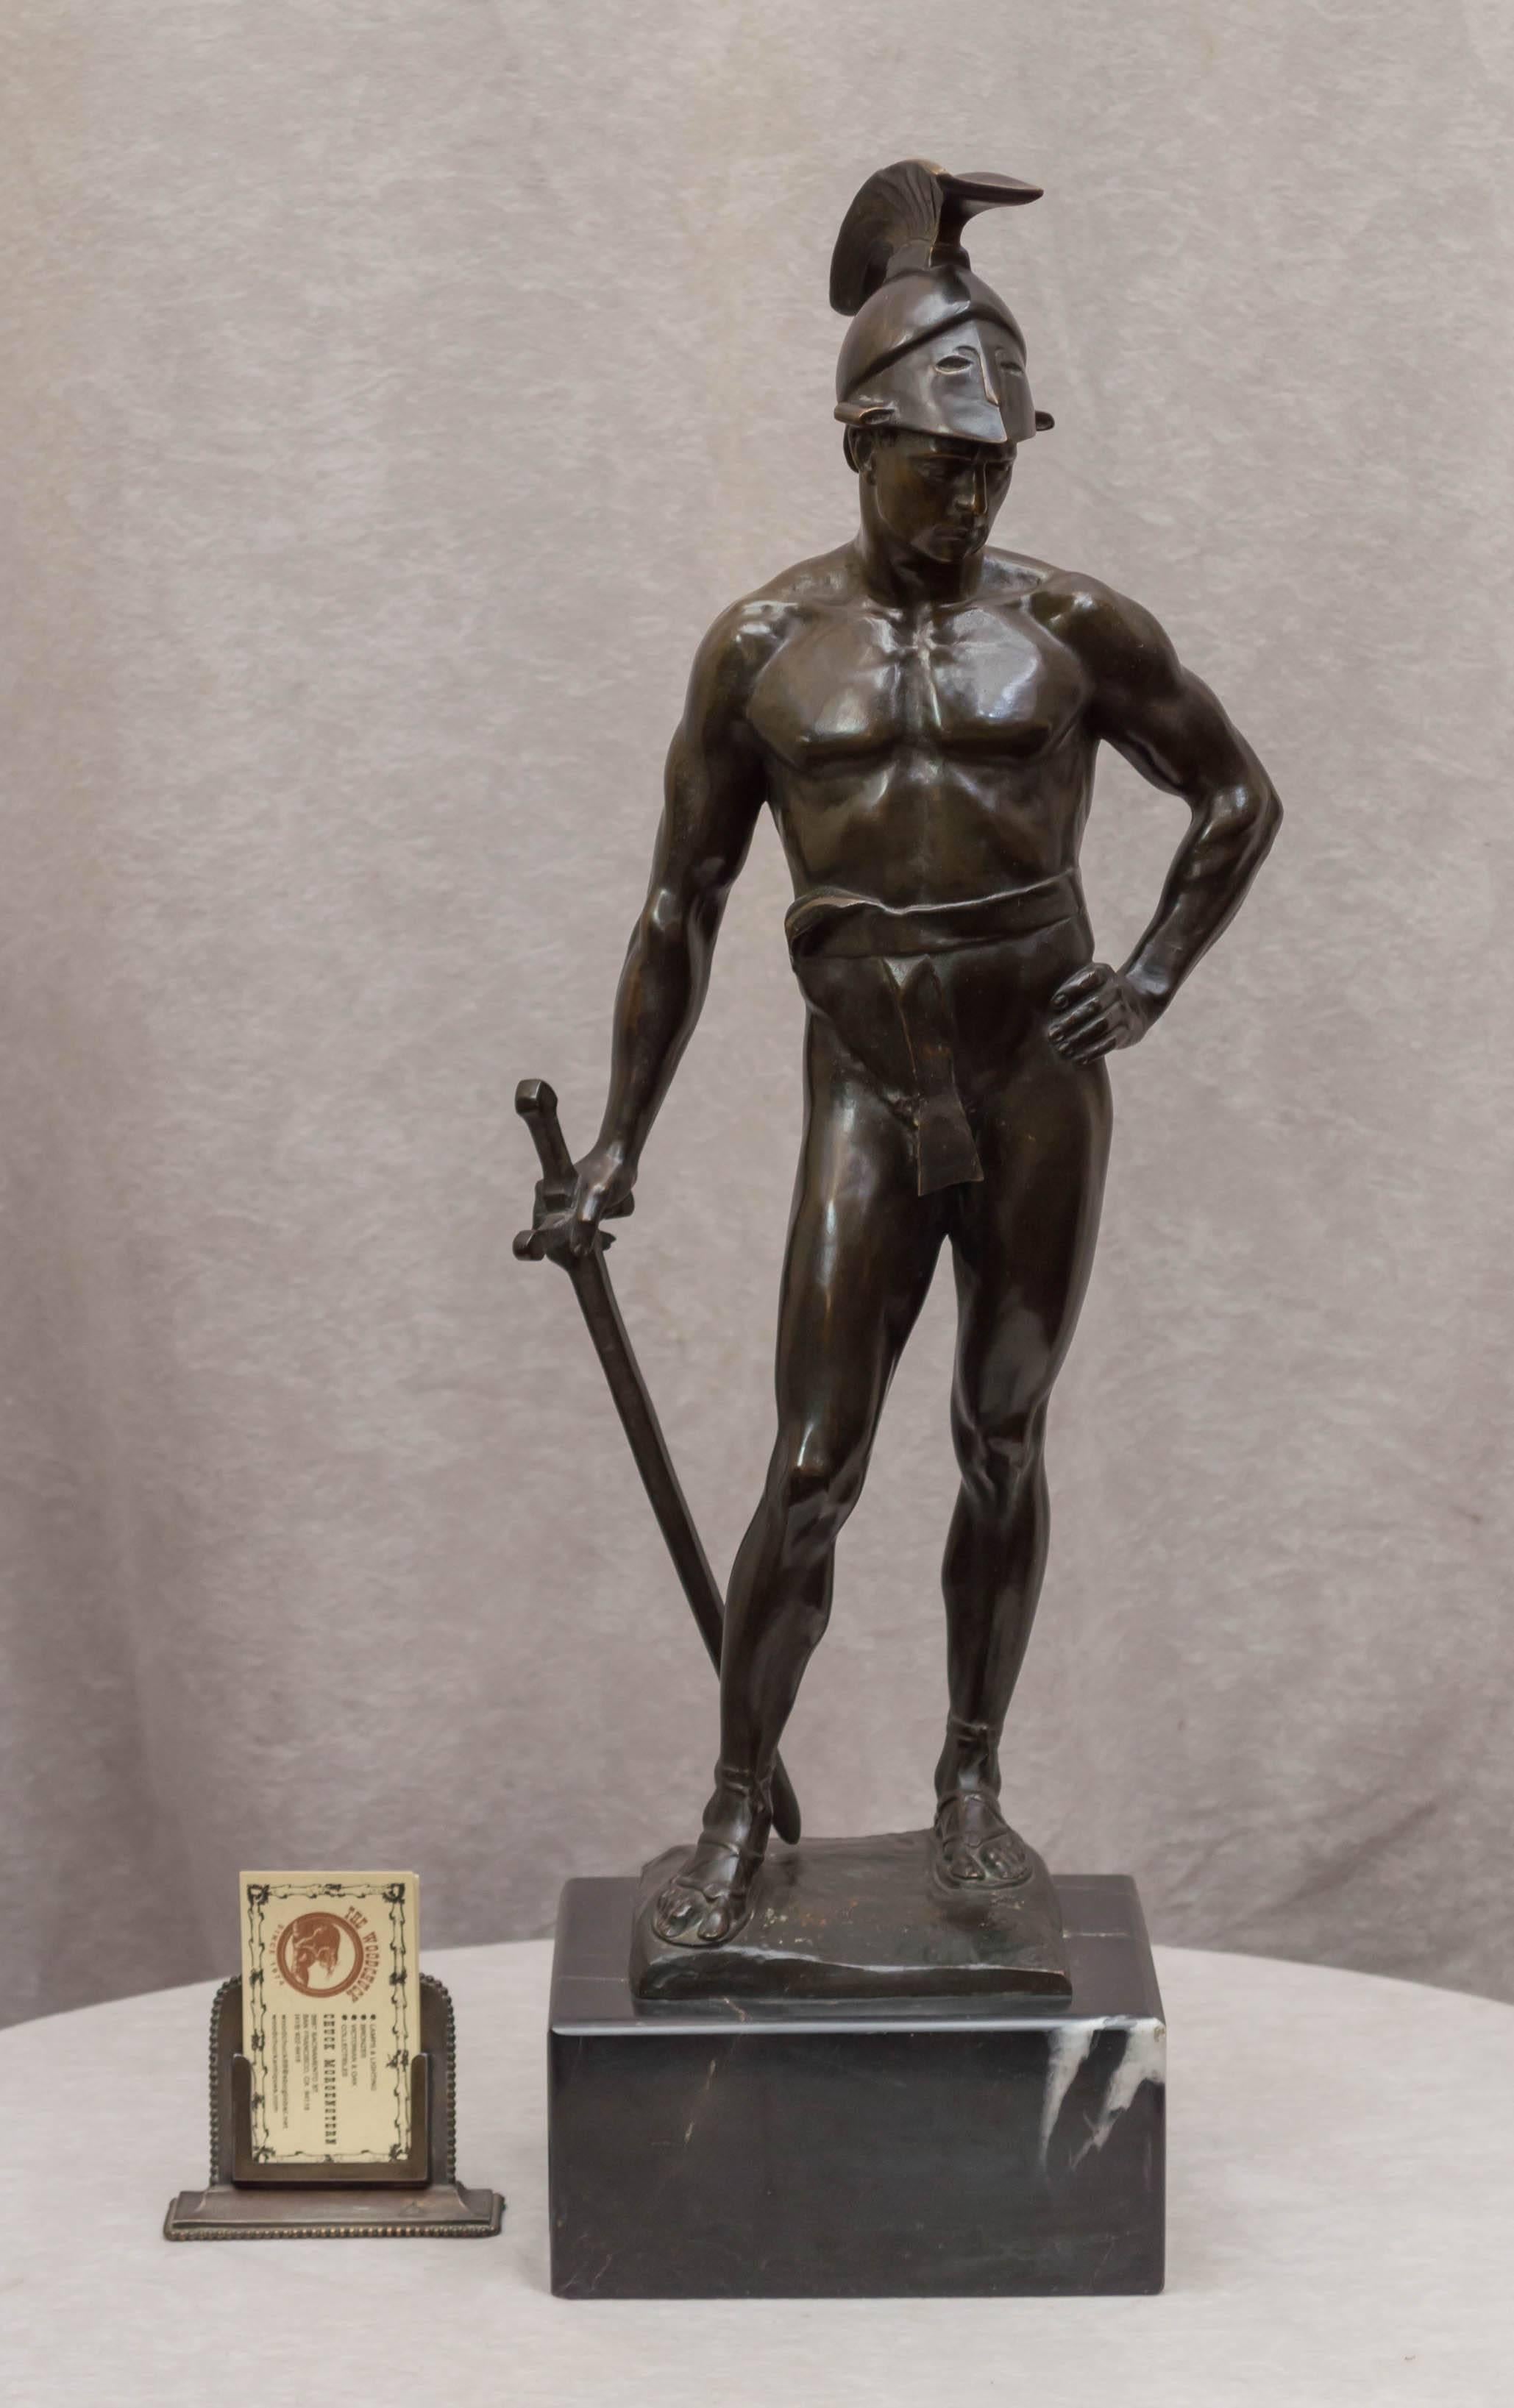 This handsome and muscular young warrior is a great example of the type of sculpture done in the late 19th and to early 20th century. Artist signed Seifert. Franz Seifert was born in Vienna in 1866. He was largely influenced by German history and